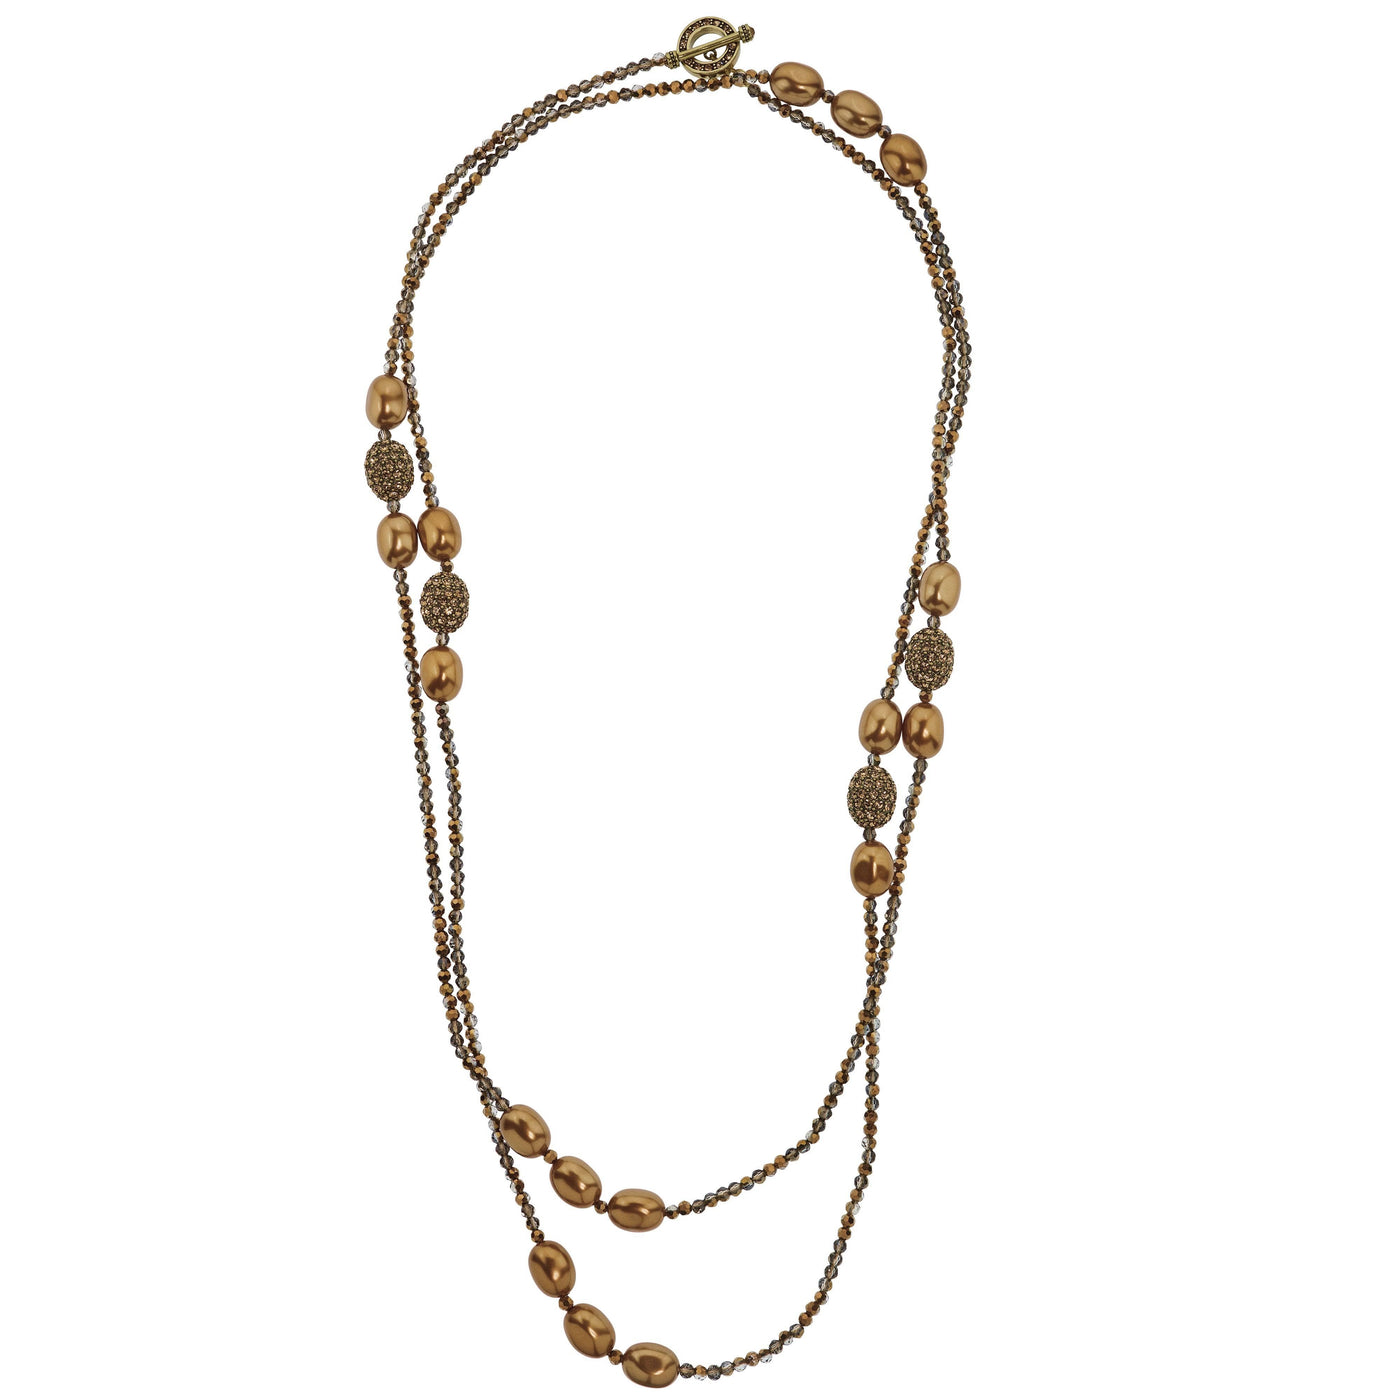 HEIDI DAUS®"Ease and Elegance" Beaded Crystal Toggle Necklace